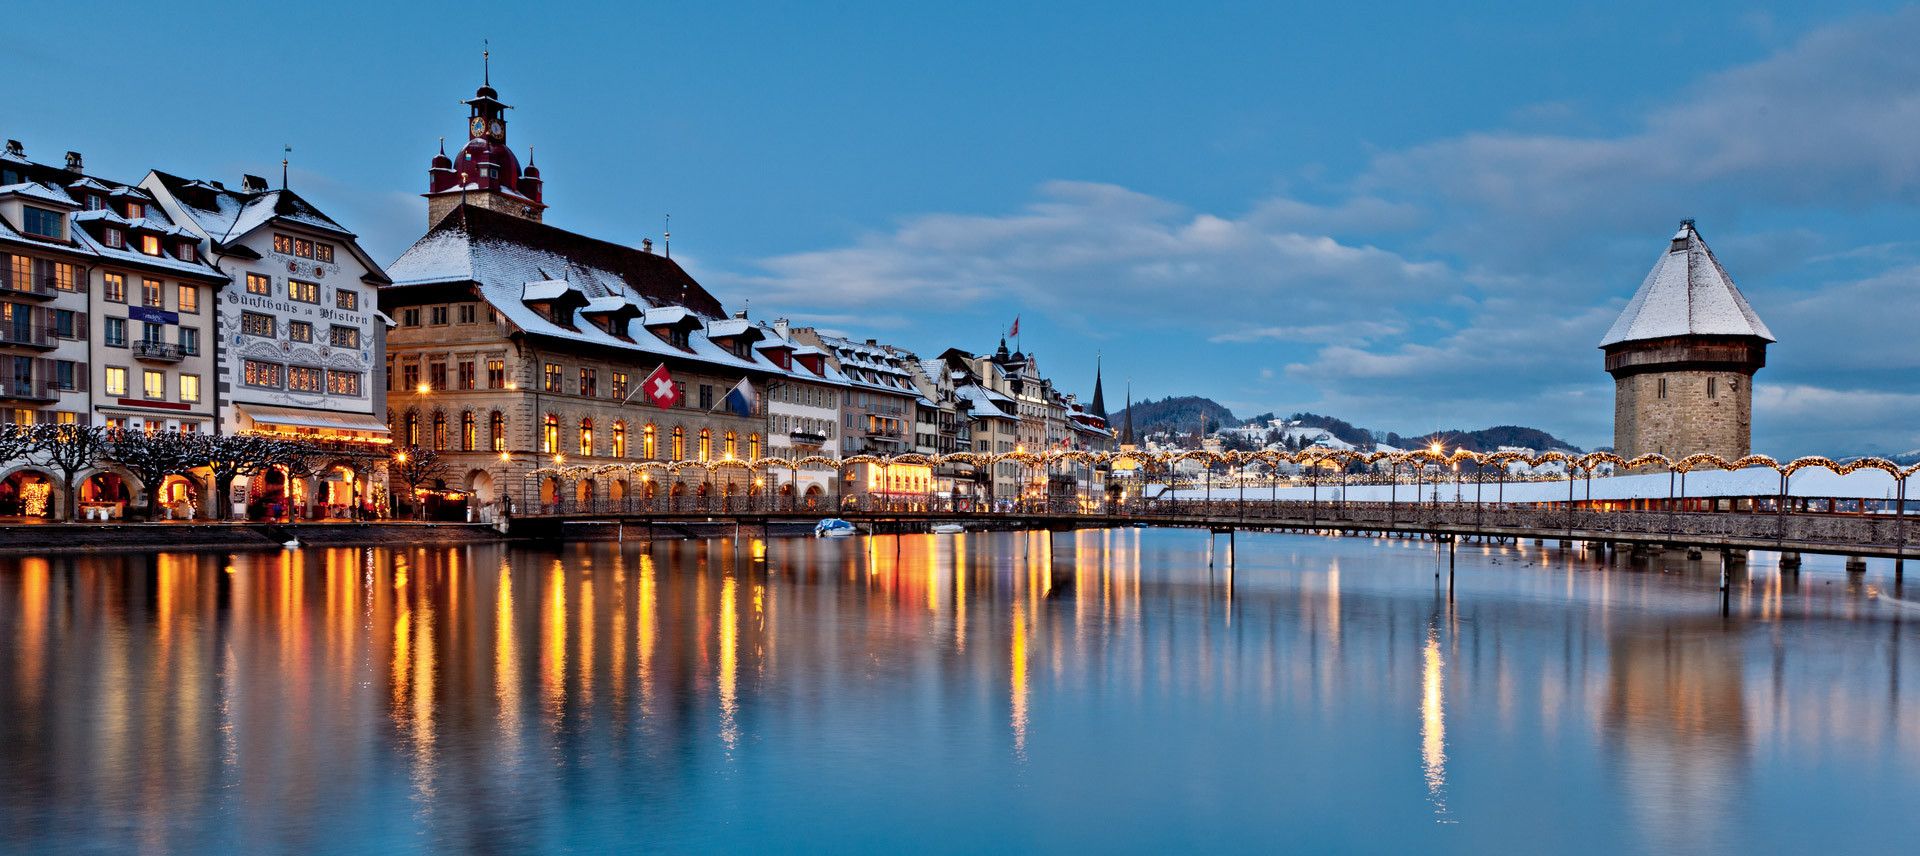 Lucerne will host the next edition of the Winter Universiade in January 2021 ©FISU